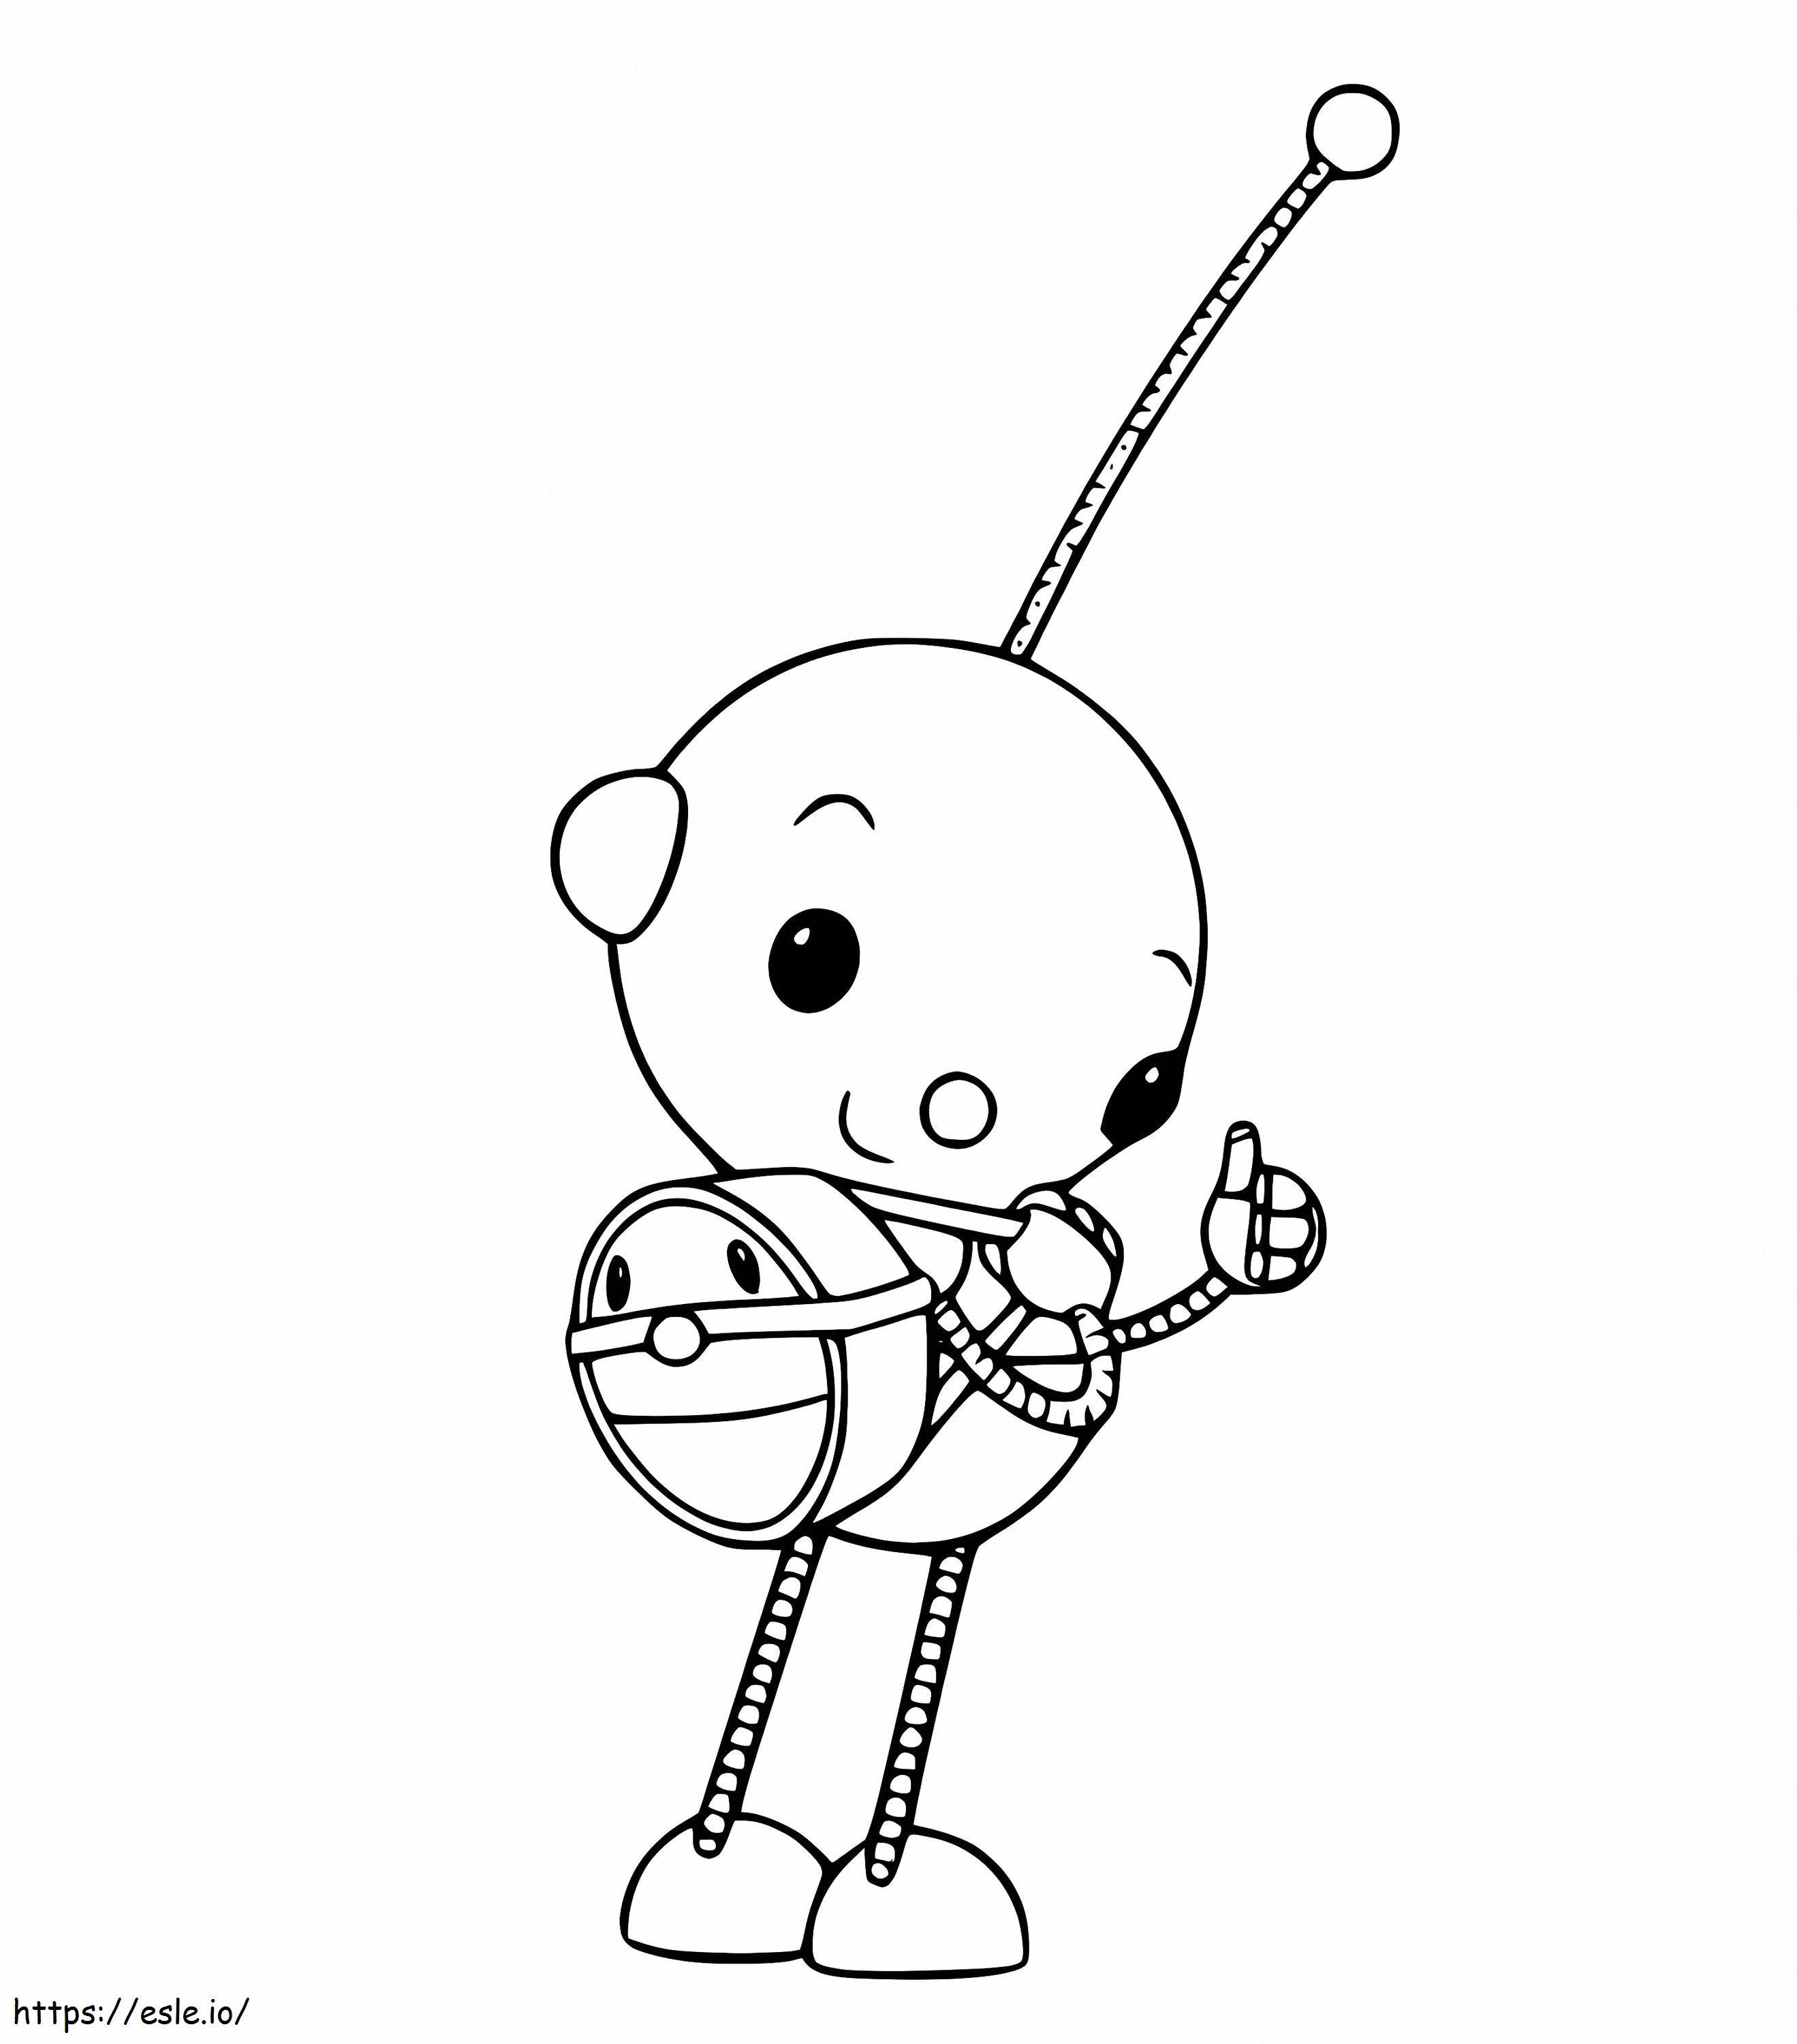 Olie Polie And Backpack coloring page